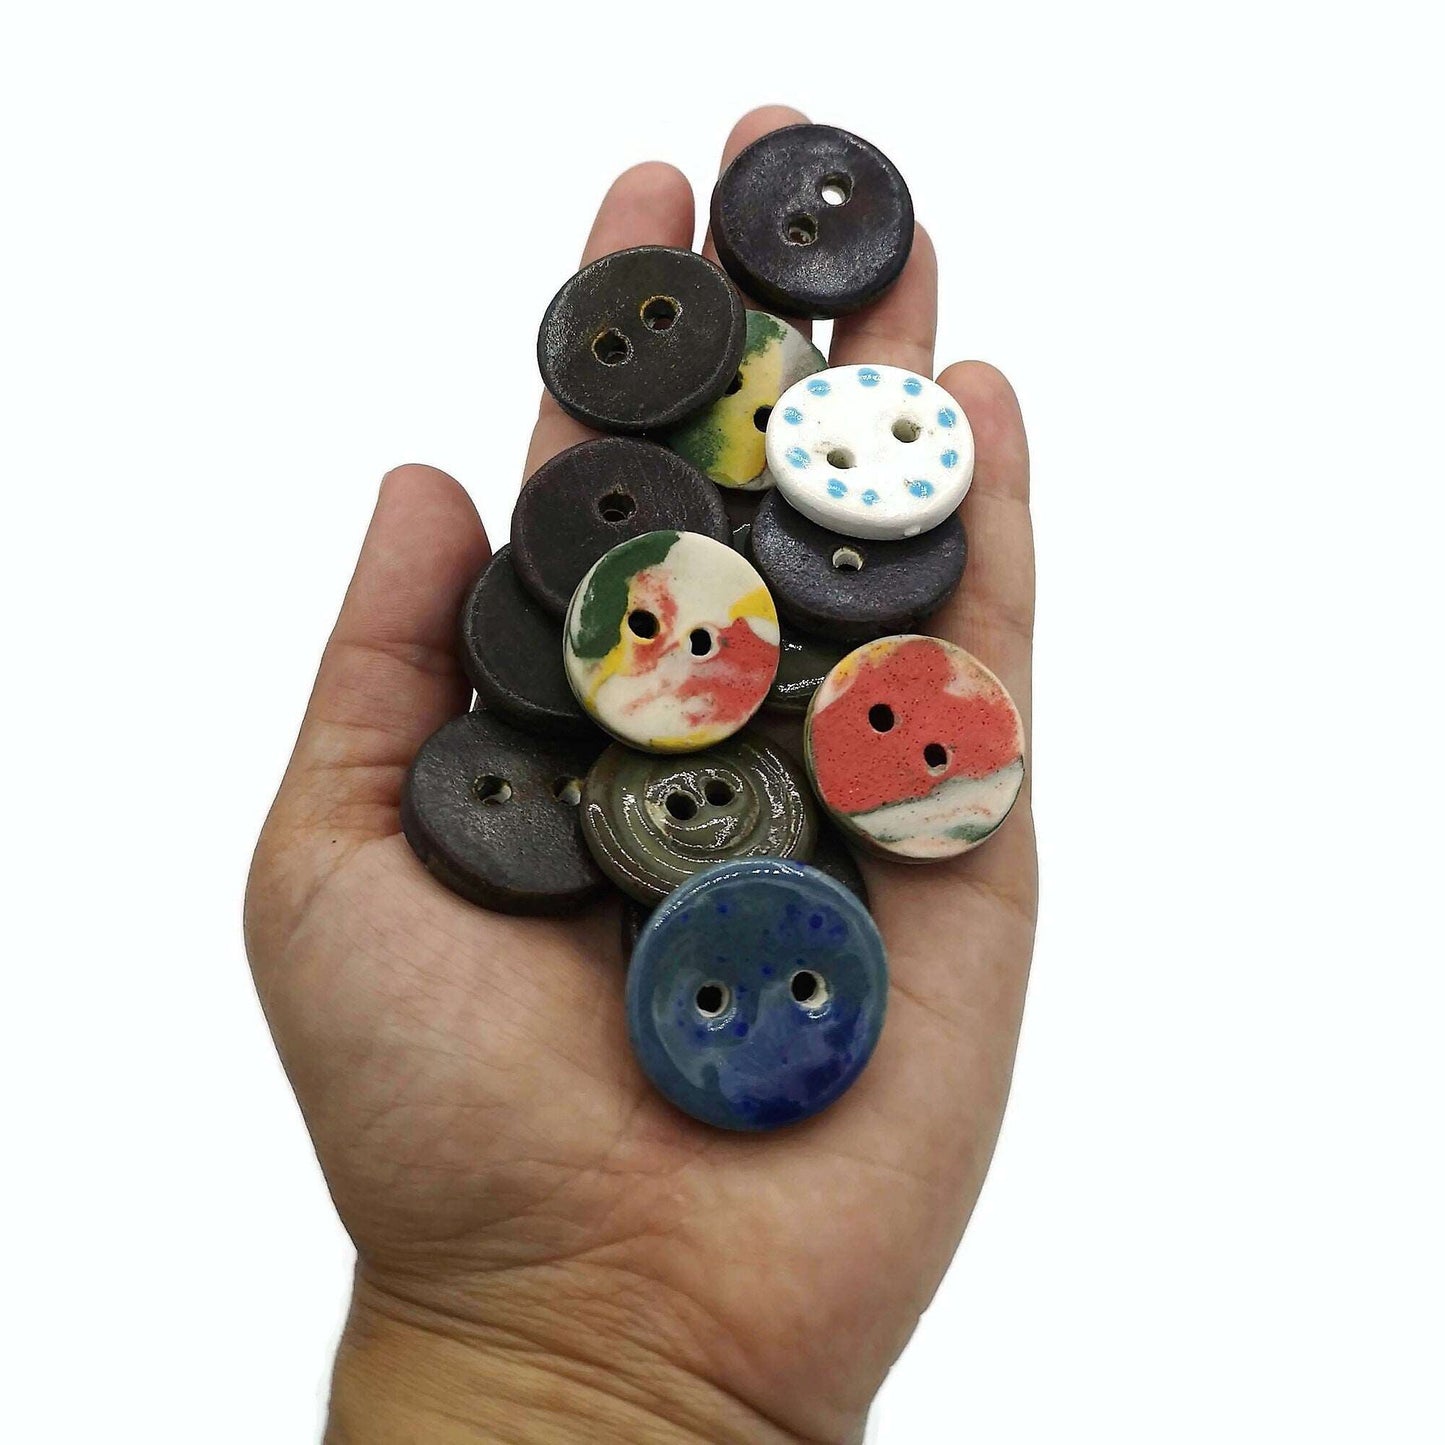 14Pc 25mm/1in Large Sewing Buttons Lot, Assorted 25mm Flatback Sew Fasteners, Handmade Ceramics Coat Button For Crafts